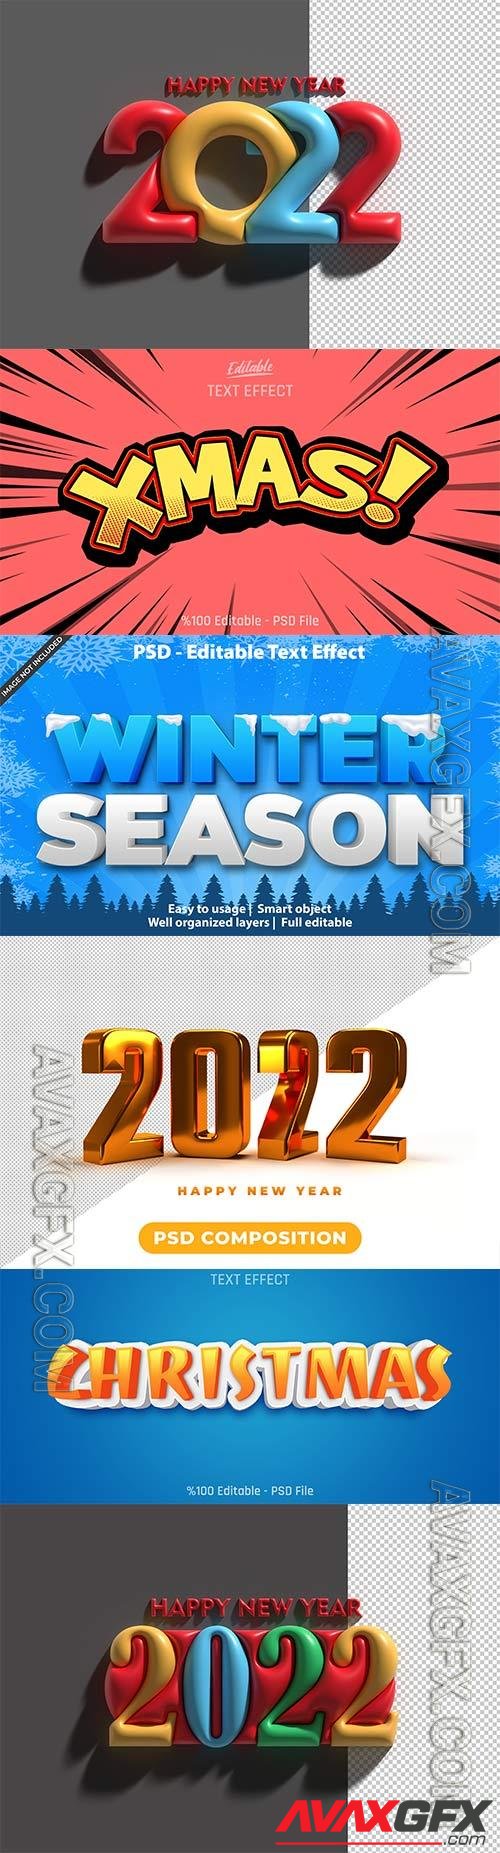 Christmas and new year 2022 psd text effect